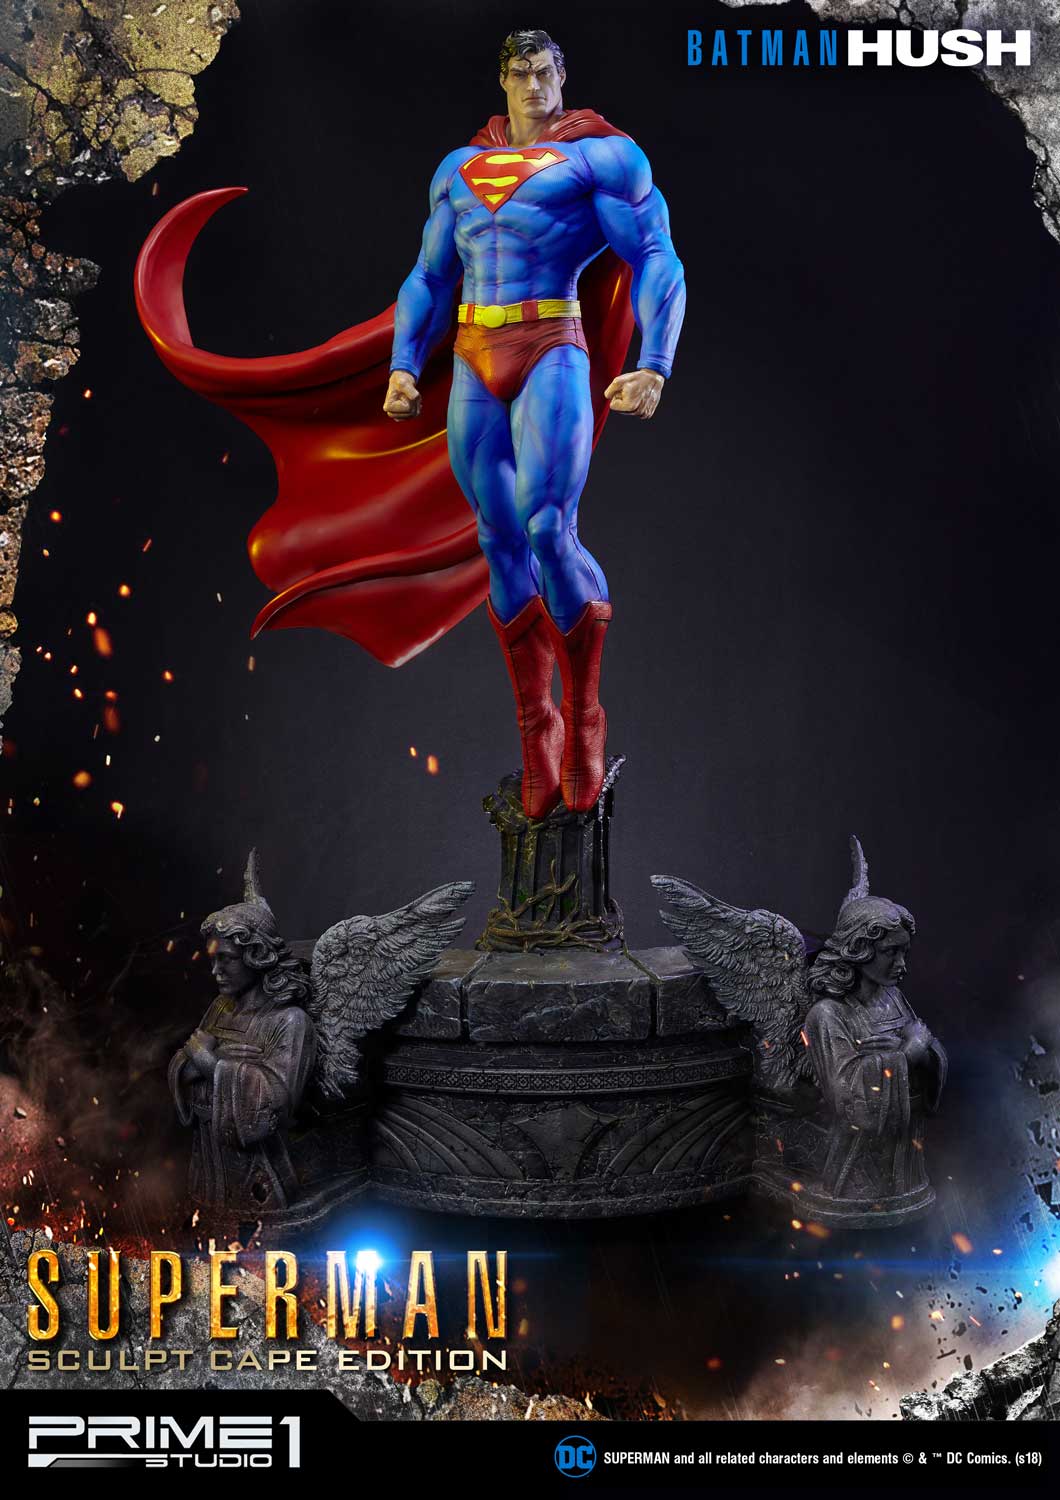 Lottery Sale of Statues Signed by Jim Lee is OPEN-4